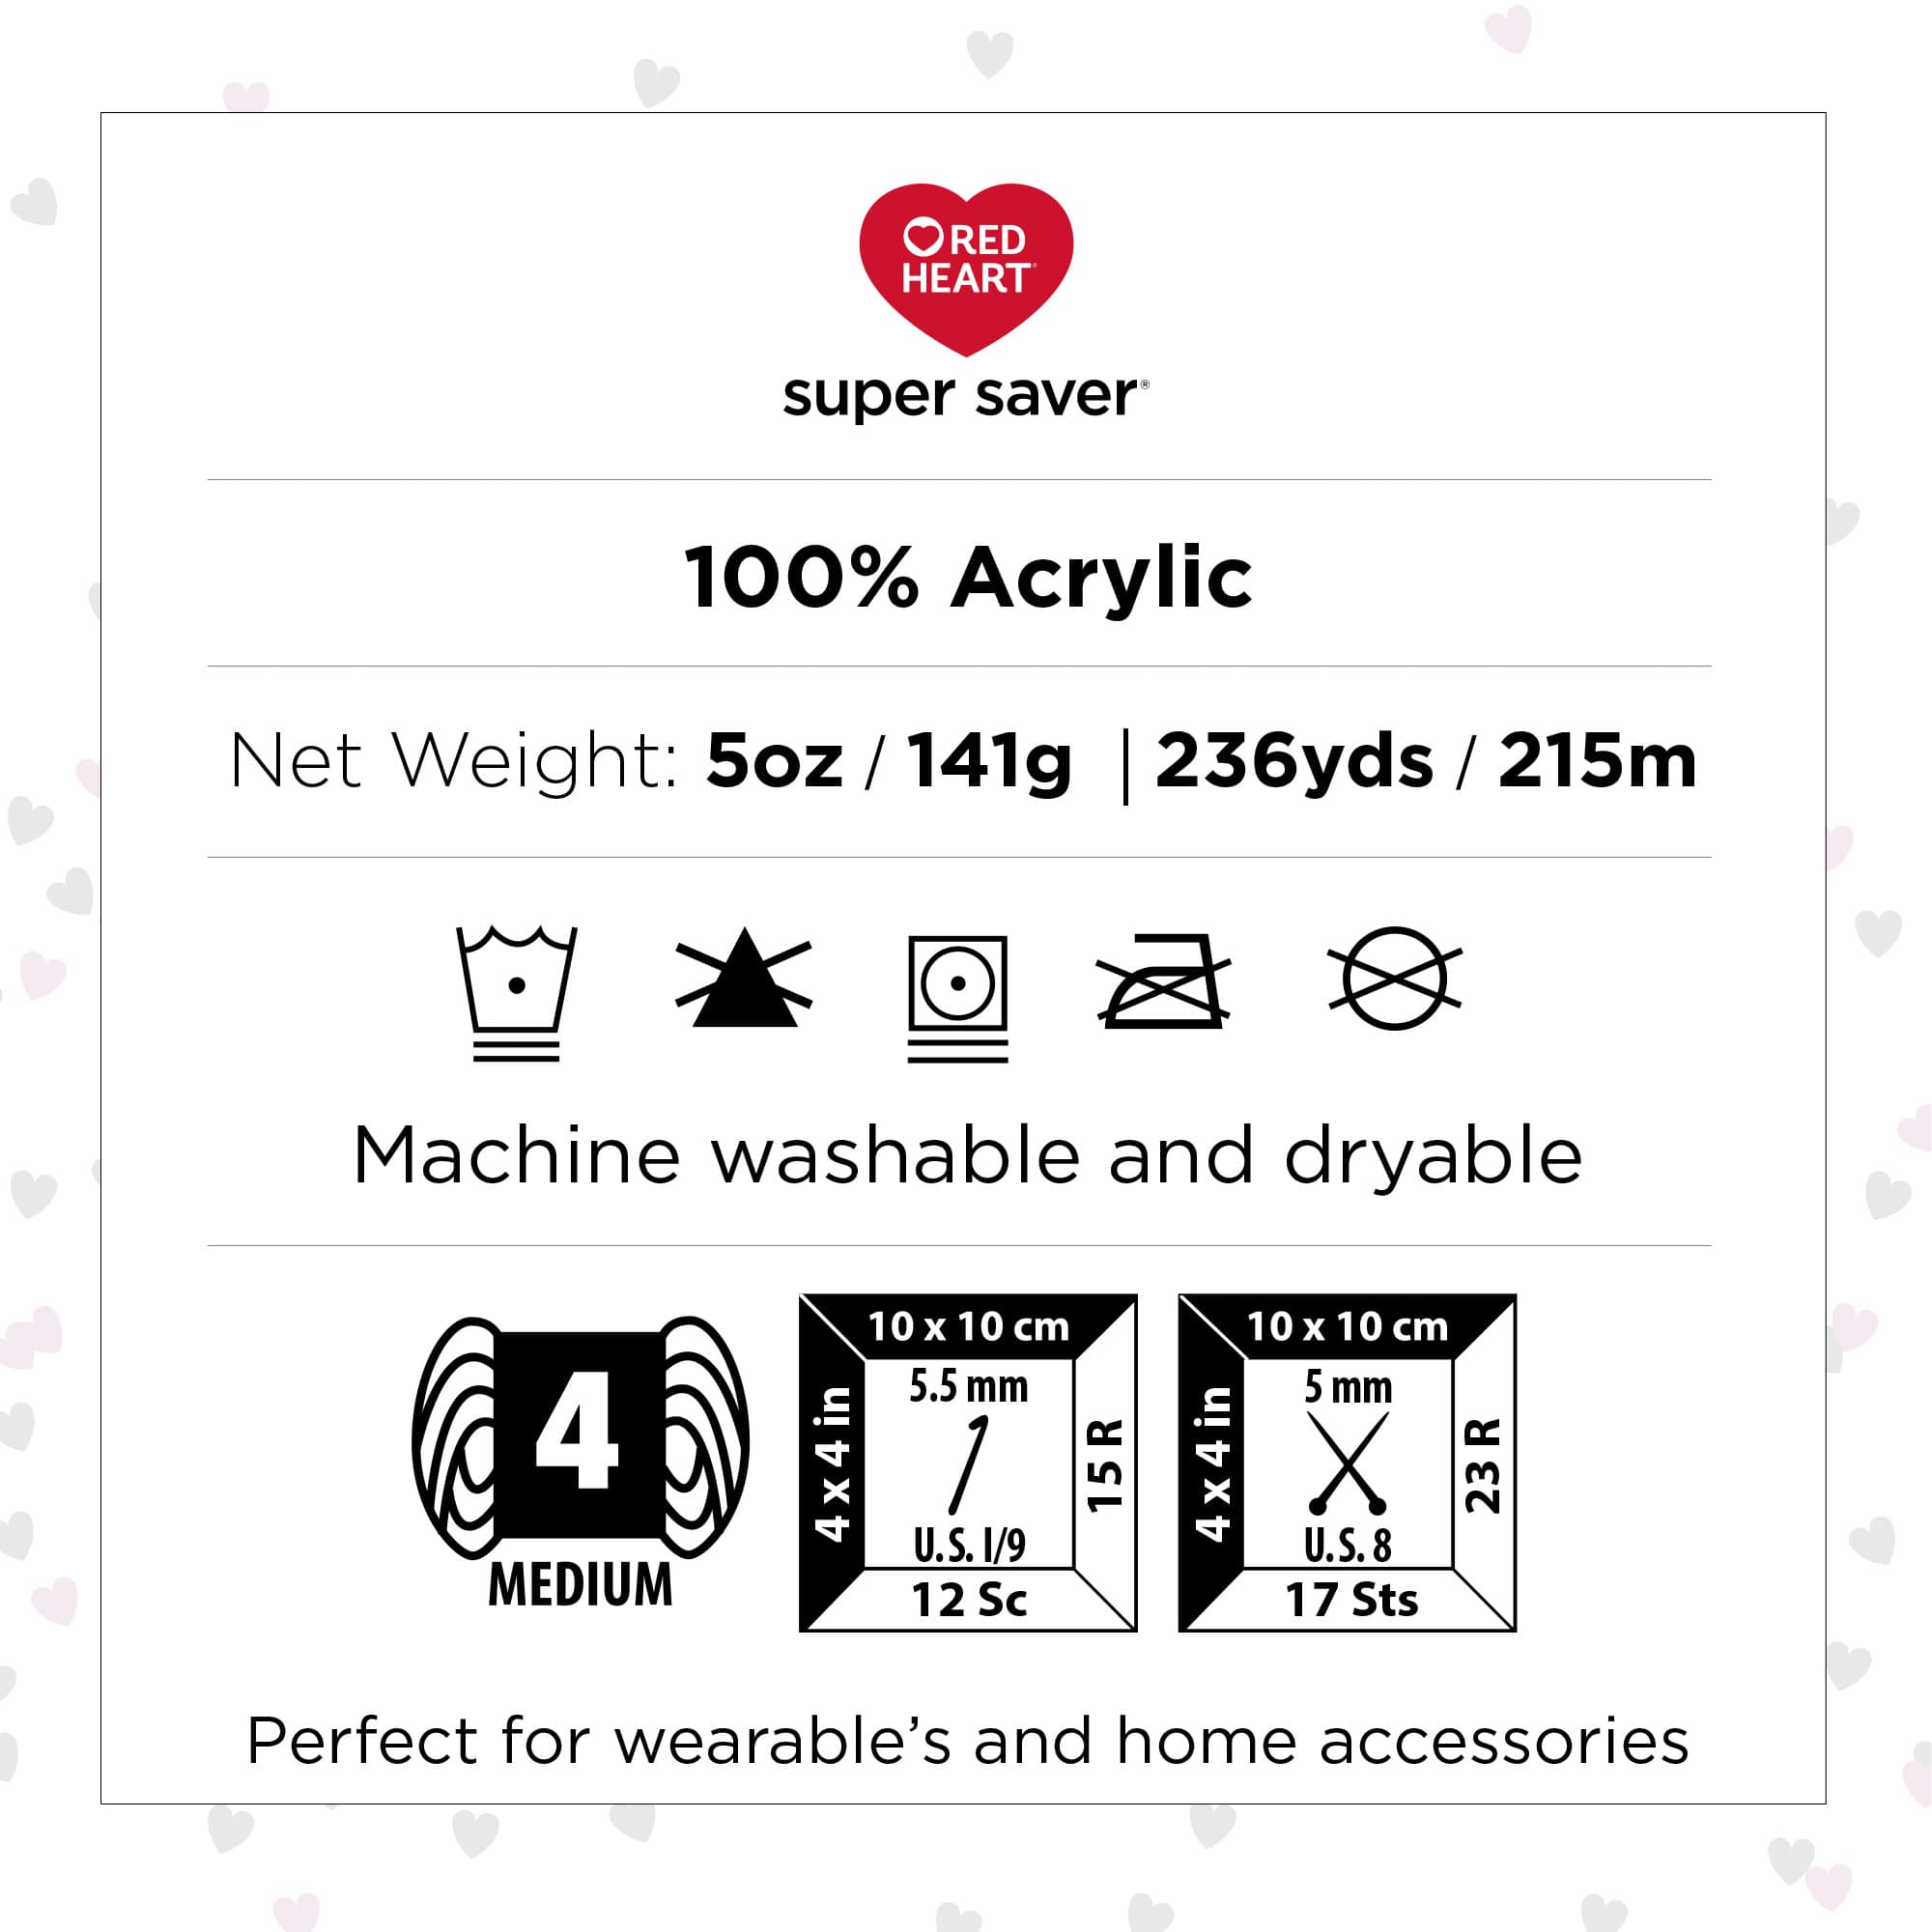 Red Heart Super Saver Yarn-Blacklight, 1 count - Fry's Food Stores